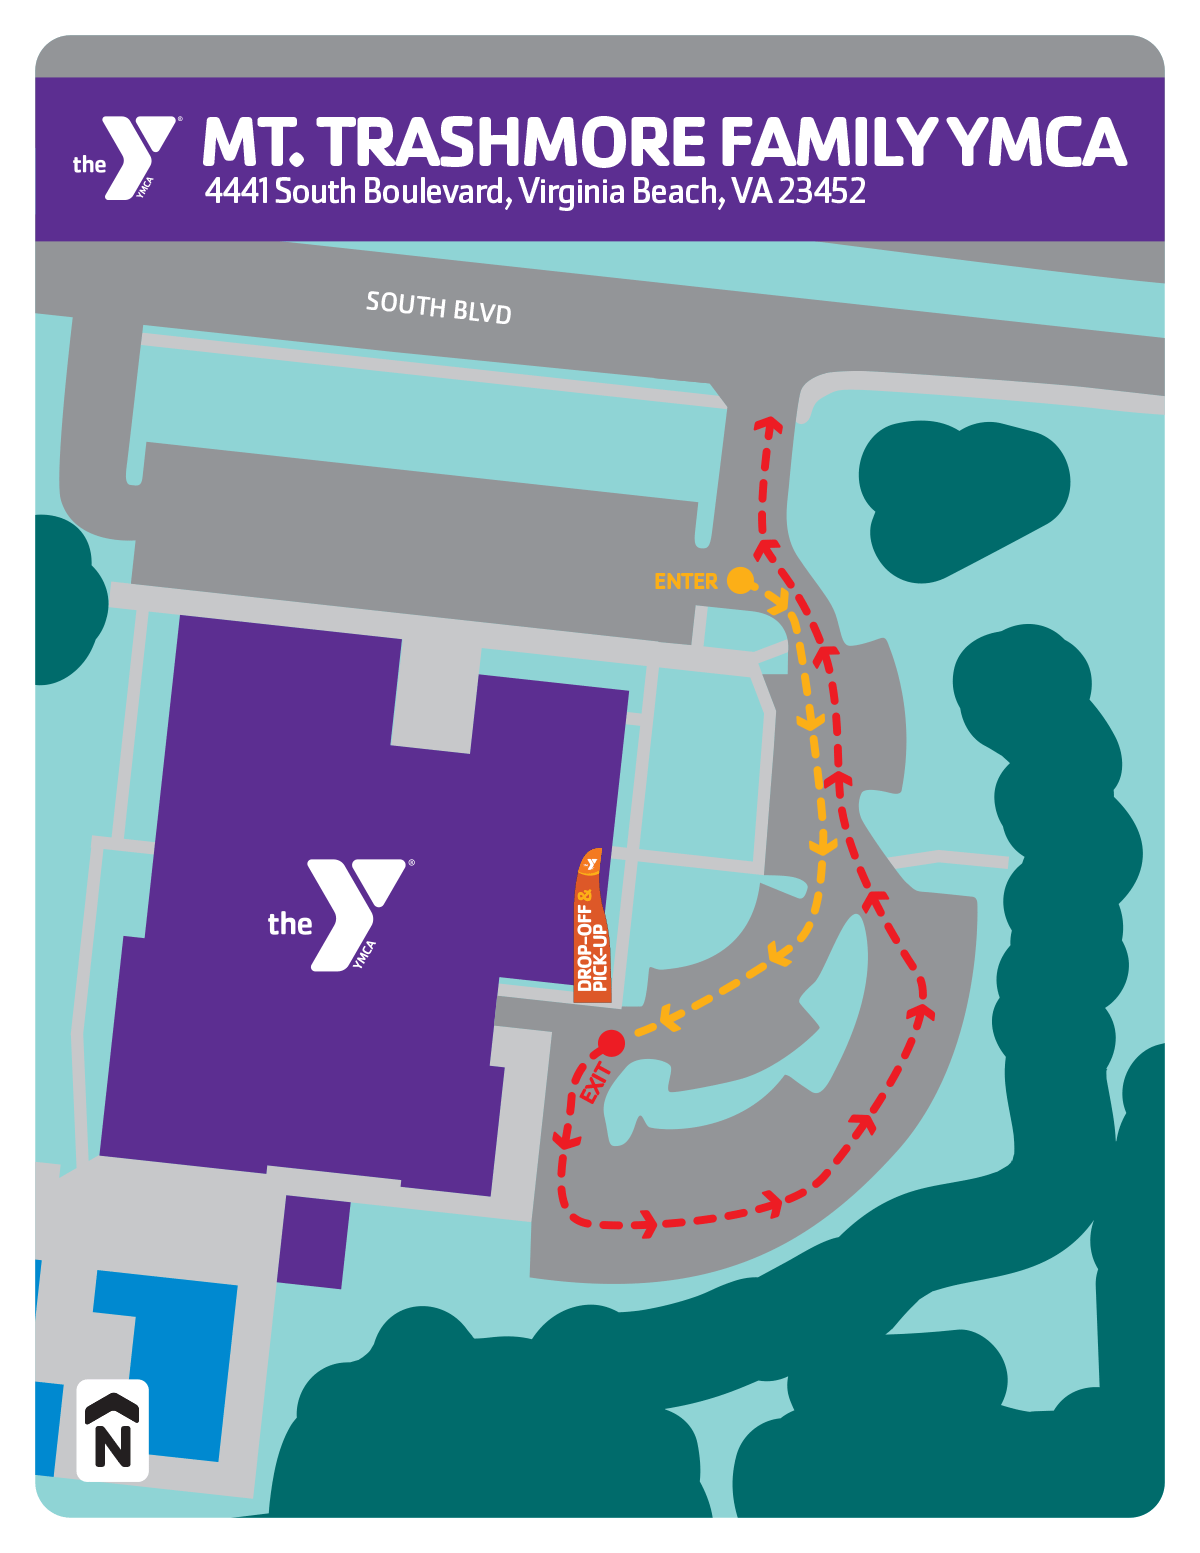 Summer camp drop-off & pick-up locations for the Mt. Trashmore Family YMCA